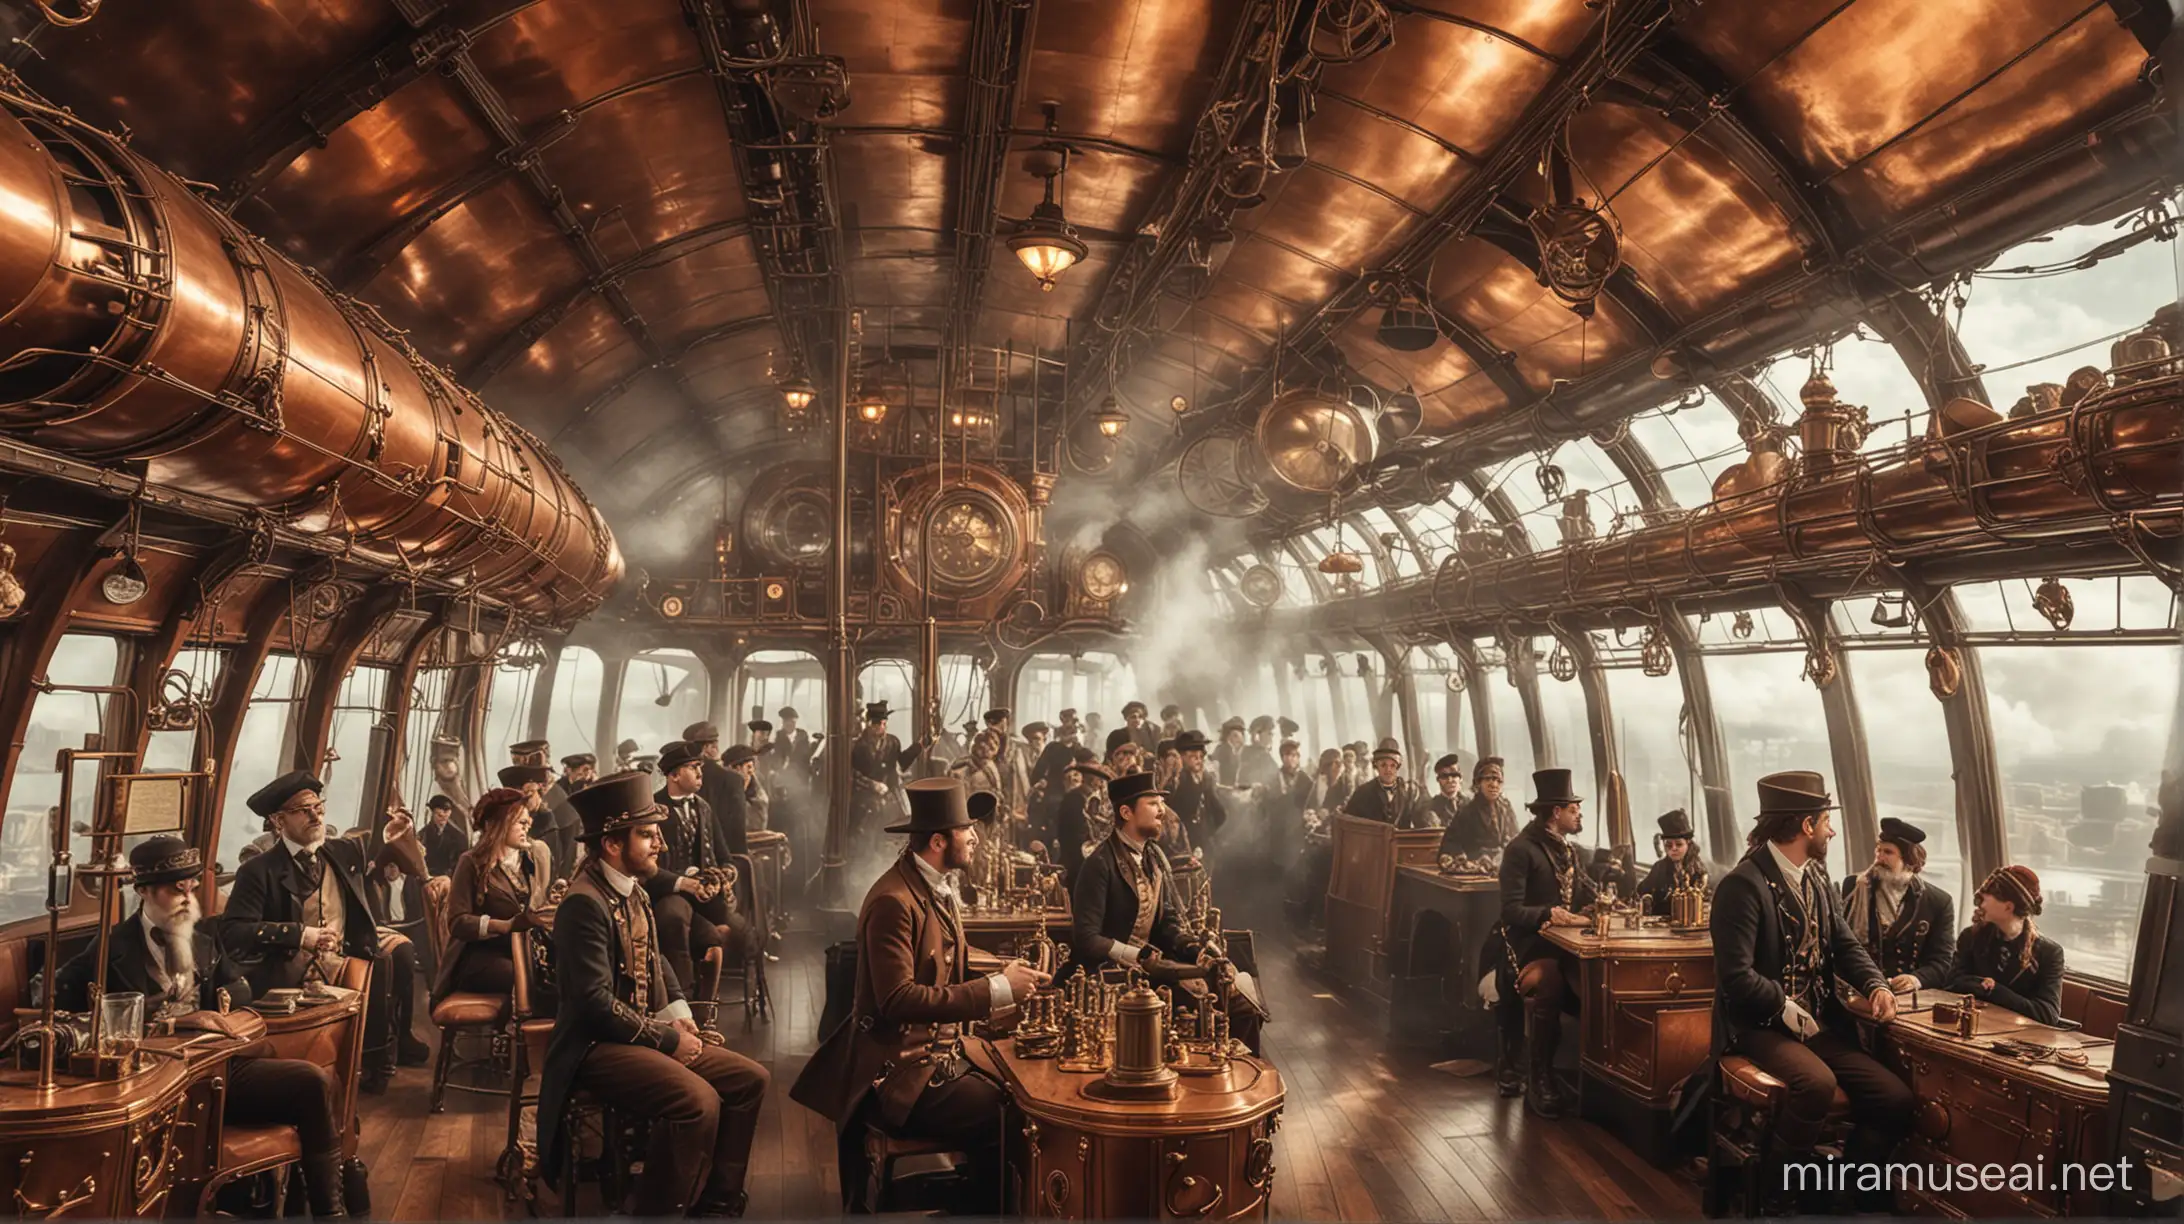 Steampunk Airship Interior with Passengers in Uniforms